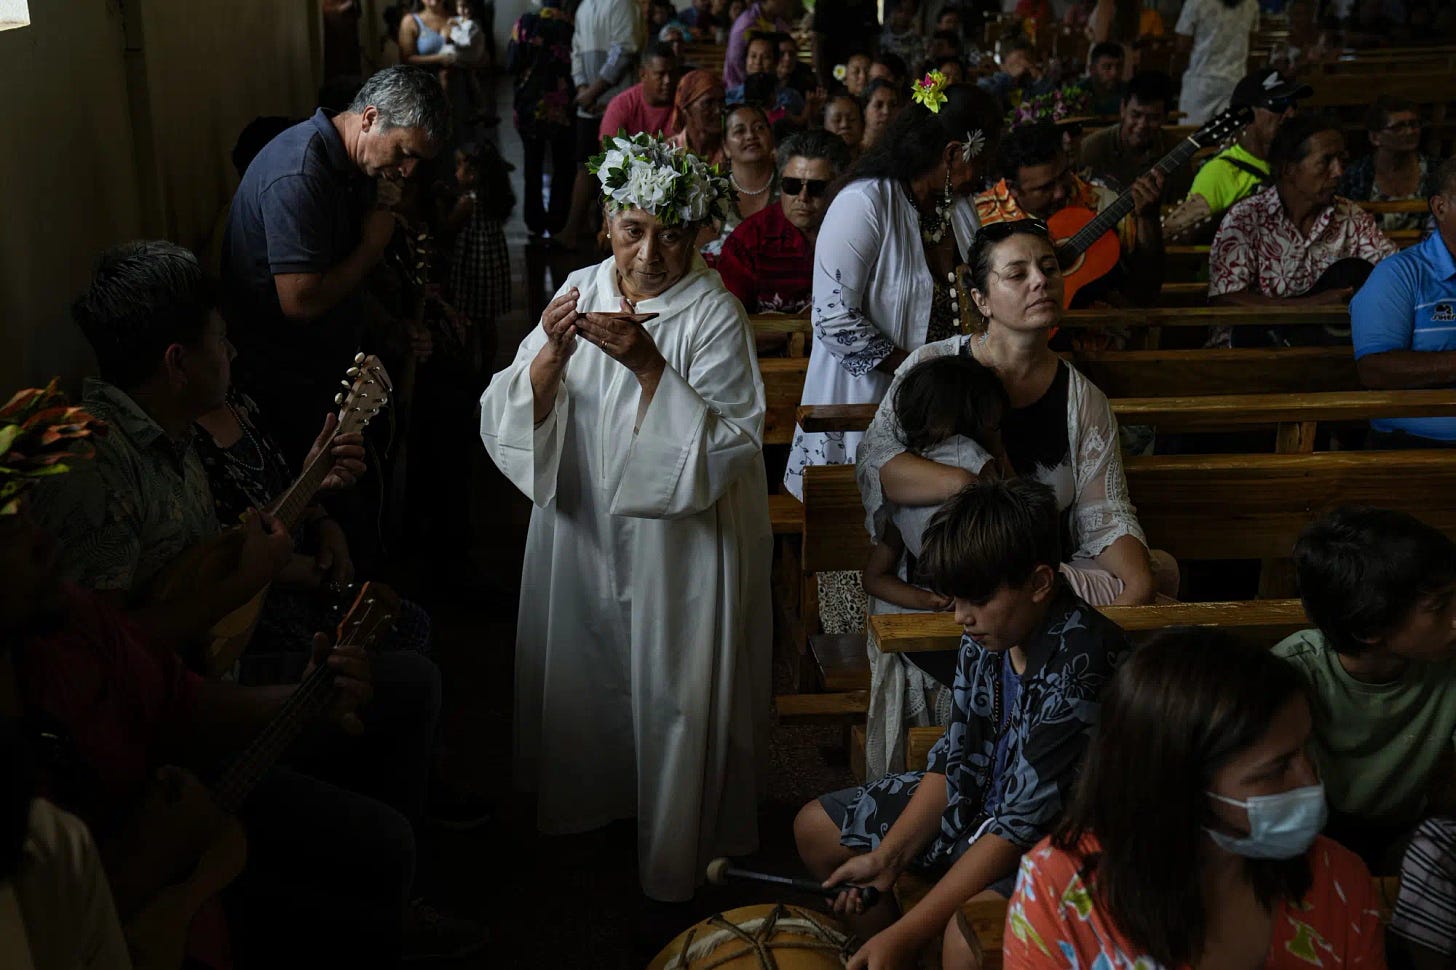 An acolyte carries the Eucharist after communion during Mass at the Church of the Holy Cross on Rapa Nui, or Easter Island, Chile, Sunday, Nov. 27, 2022. The first Europeans arrived to Rapa Nui in 1722, soon followed by missionaries, when Rapanui religiosity began to intertwine with Christianity. (AP Photo/Esteban Felix)